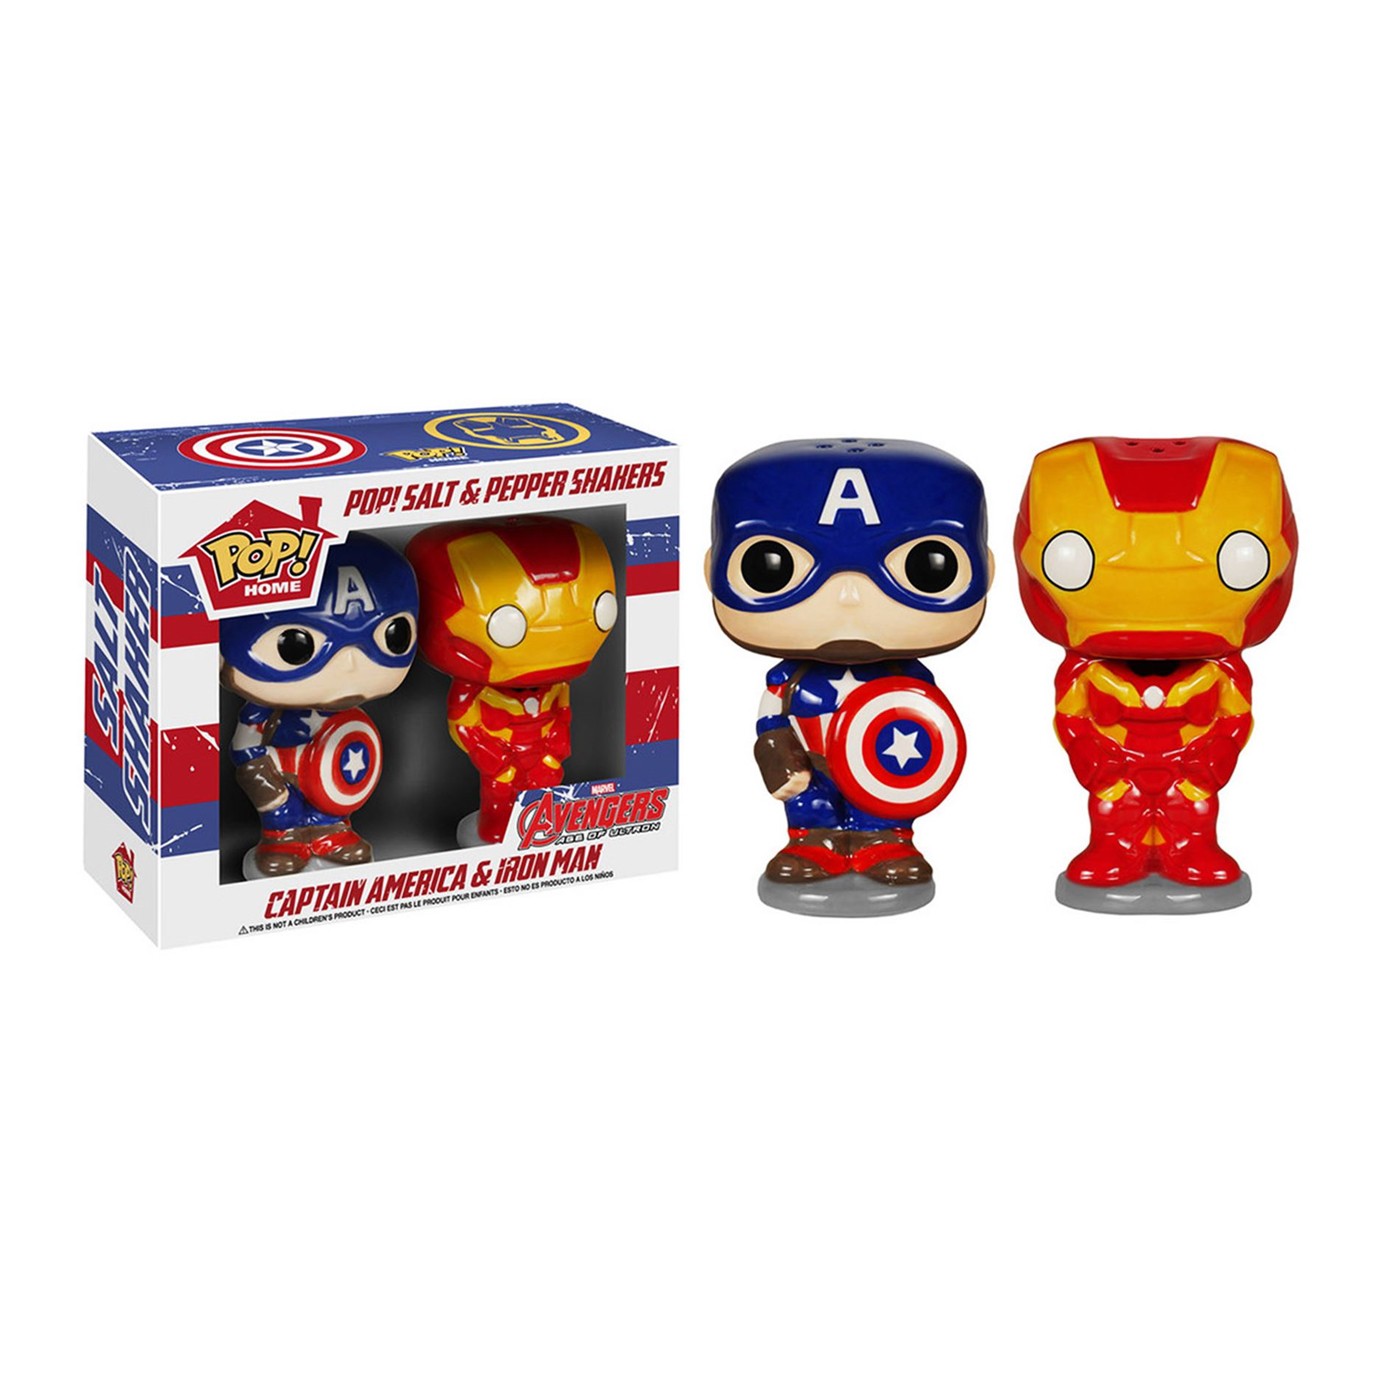 Captain America and Iron Man POP Salt and Pepper Shakers